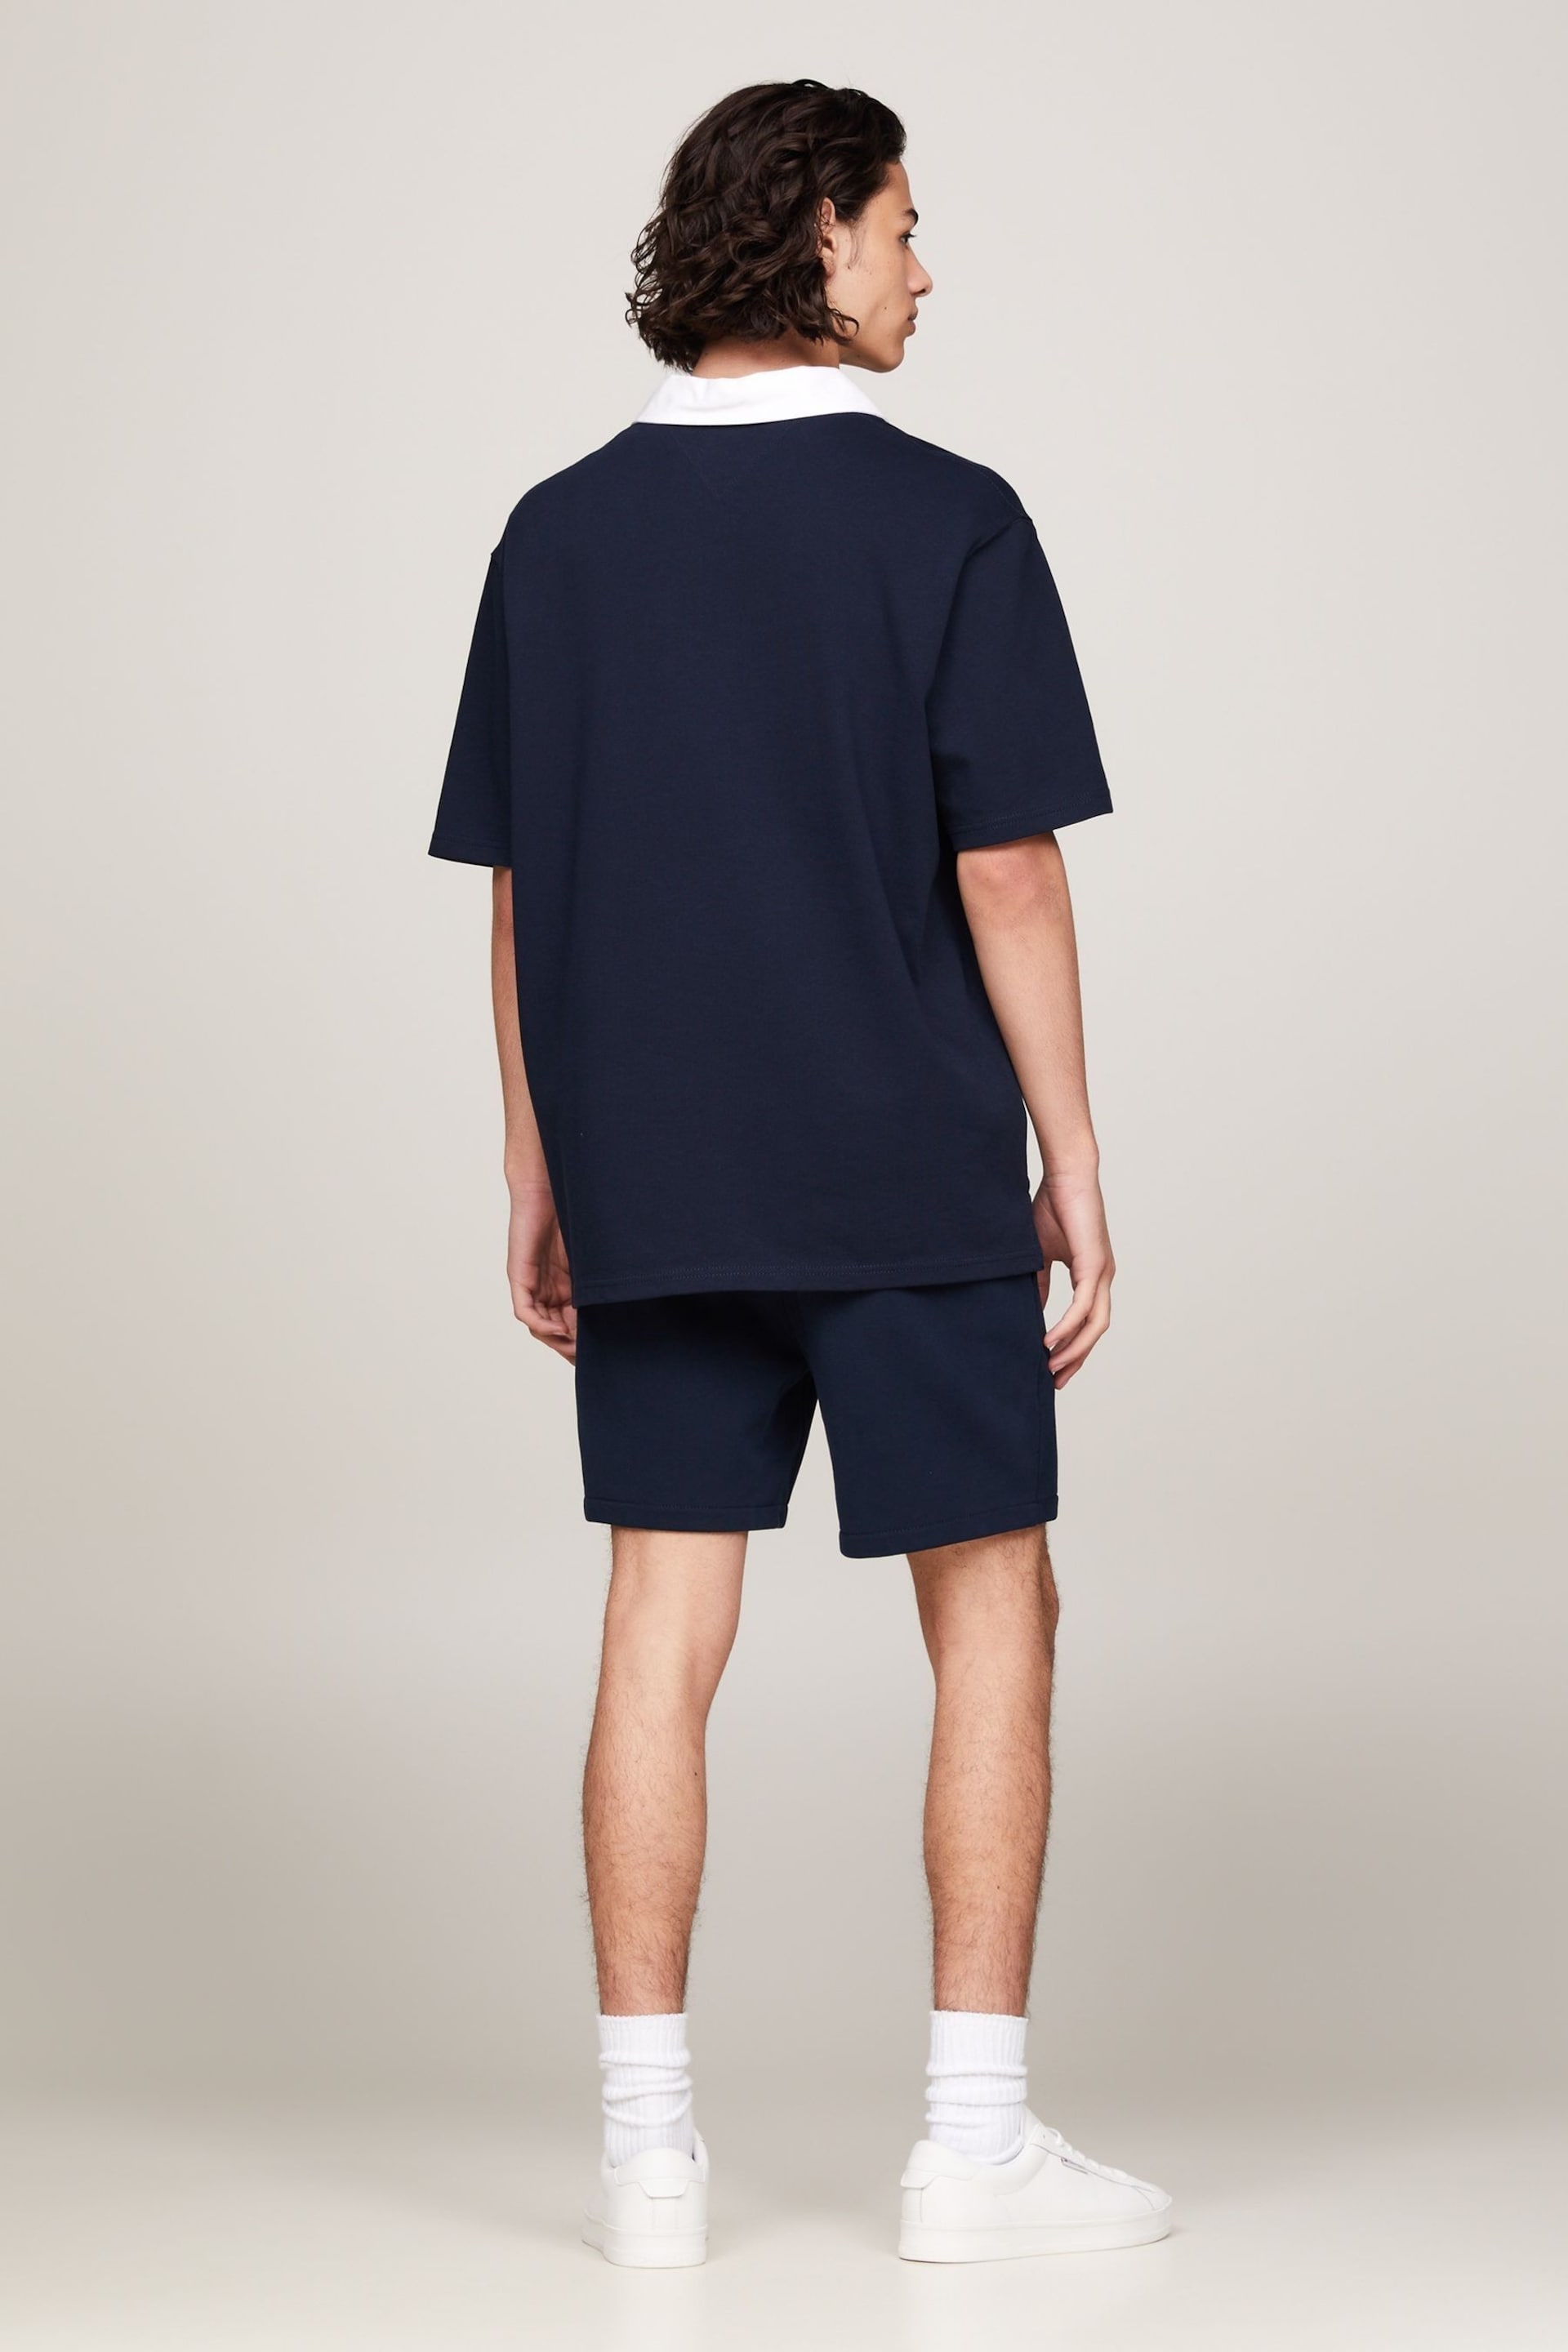 Tommy Jeans Blue Oversized Classic Rugby Shirt - Image 2 of 6